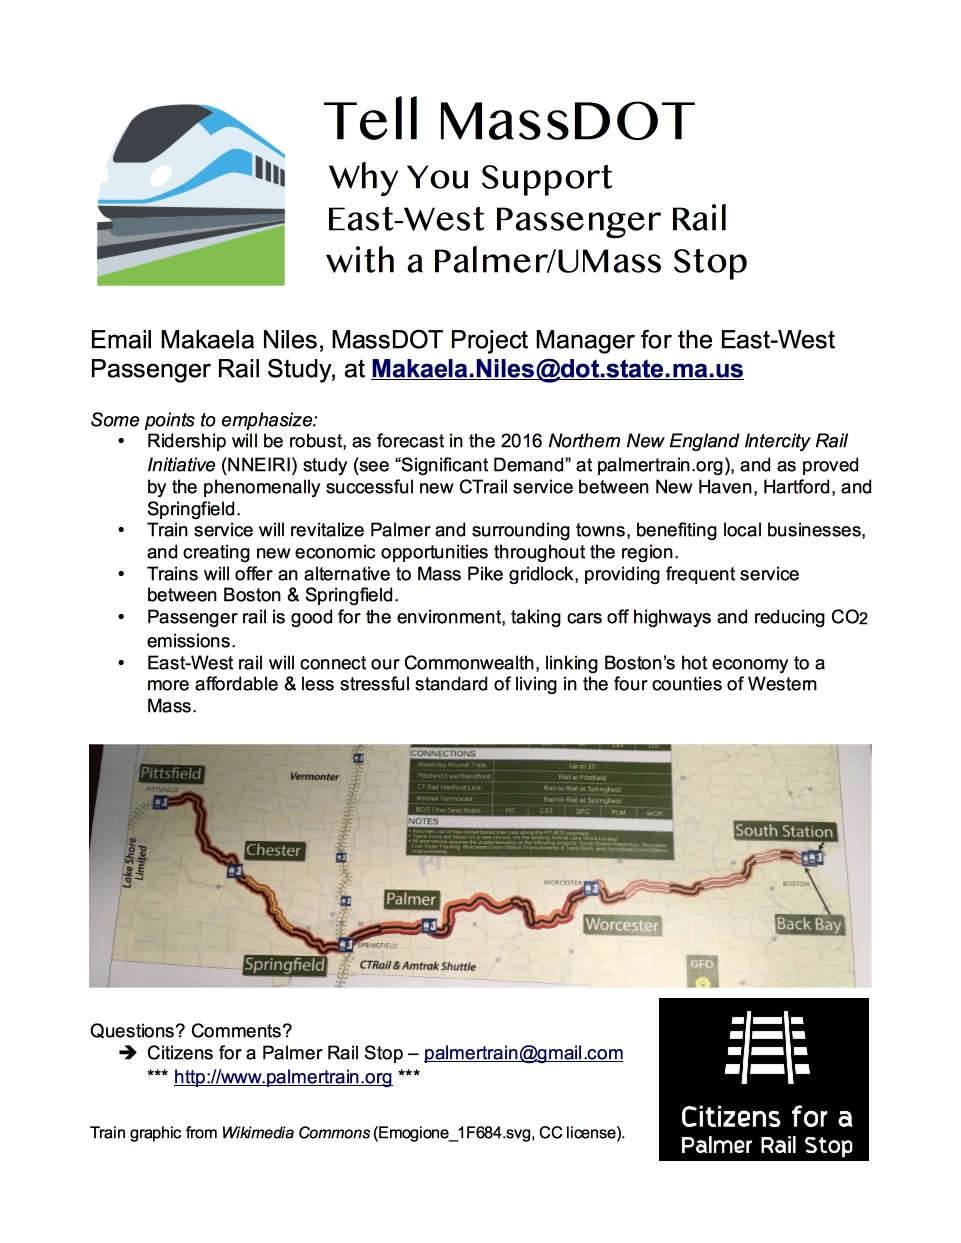 Flyer asks everyone to tell MassDOT why they support East-West passenger rail with a Palmer/UMass stop. Send emails to Makaela Niles, MassDOT Project Manager for the East-West Passenger Rail Study, at Makaela.Niles@dot.state.ma.us